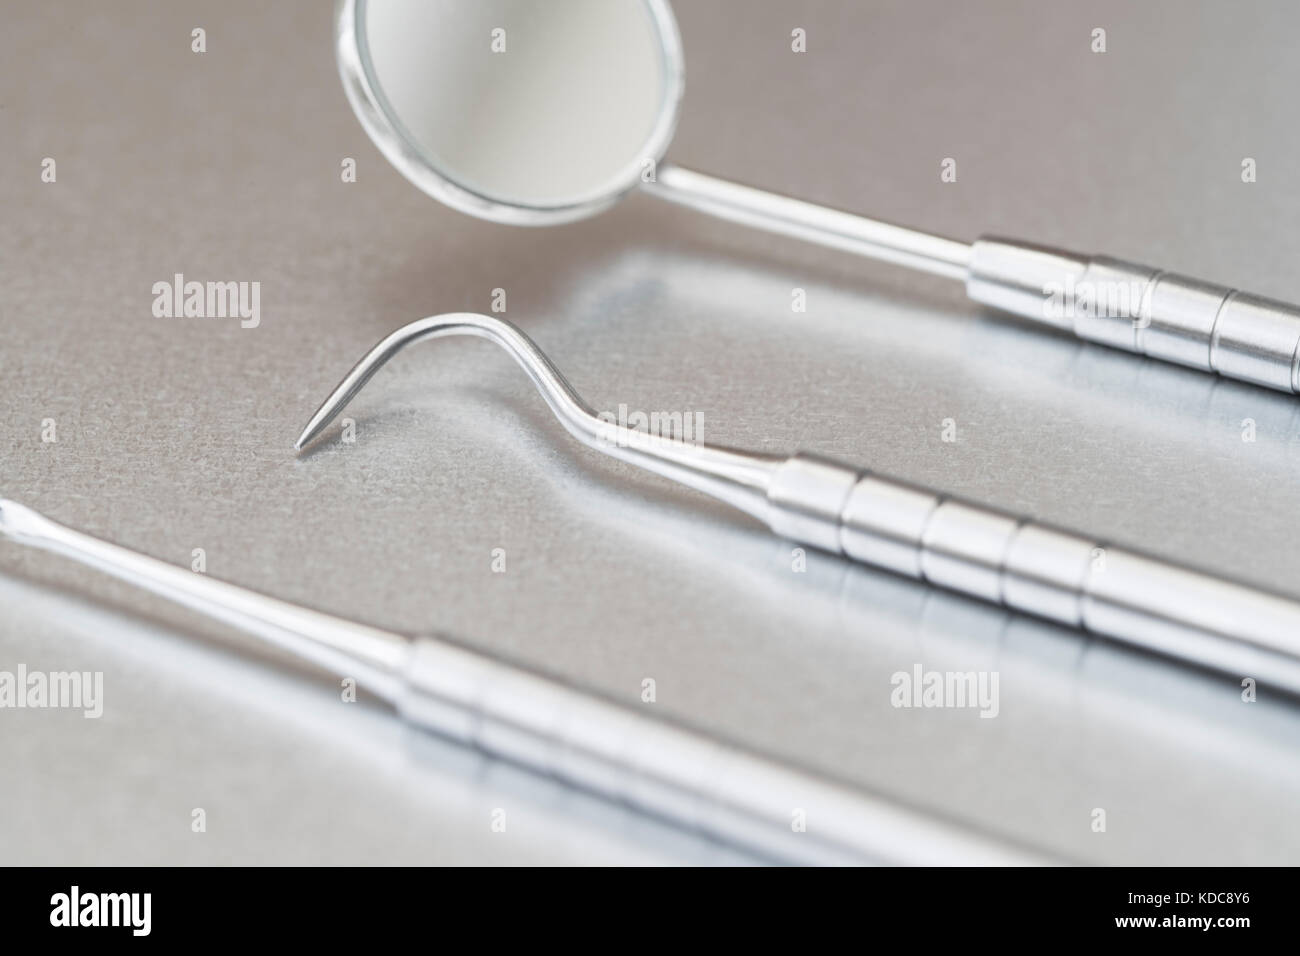 Close Up Of Dental Instruments On Metal Surface Stock Photo